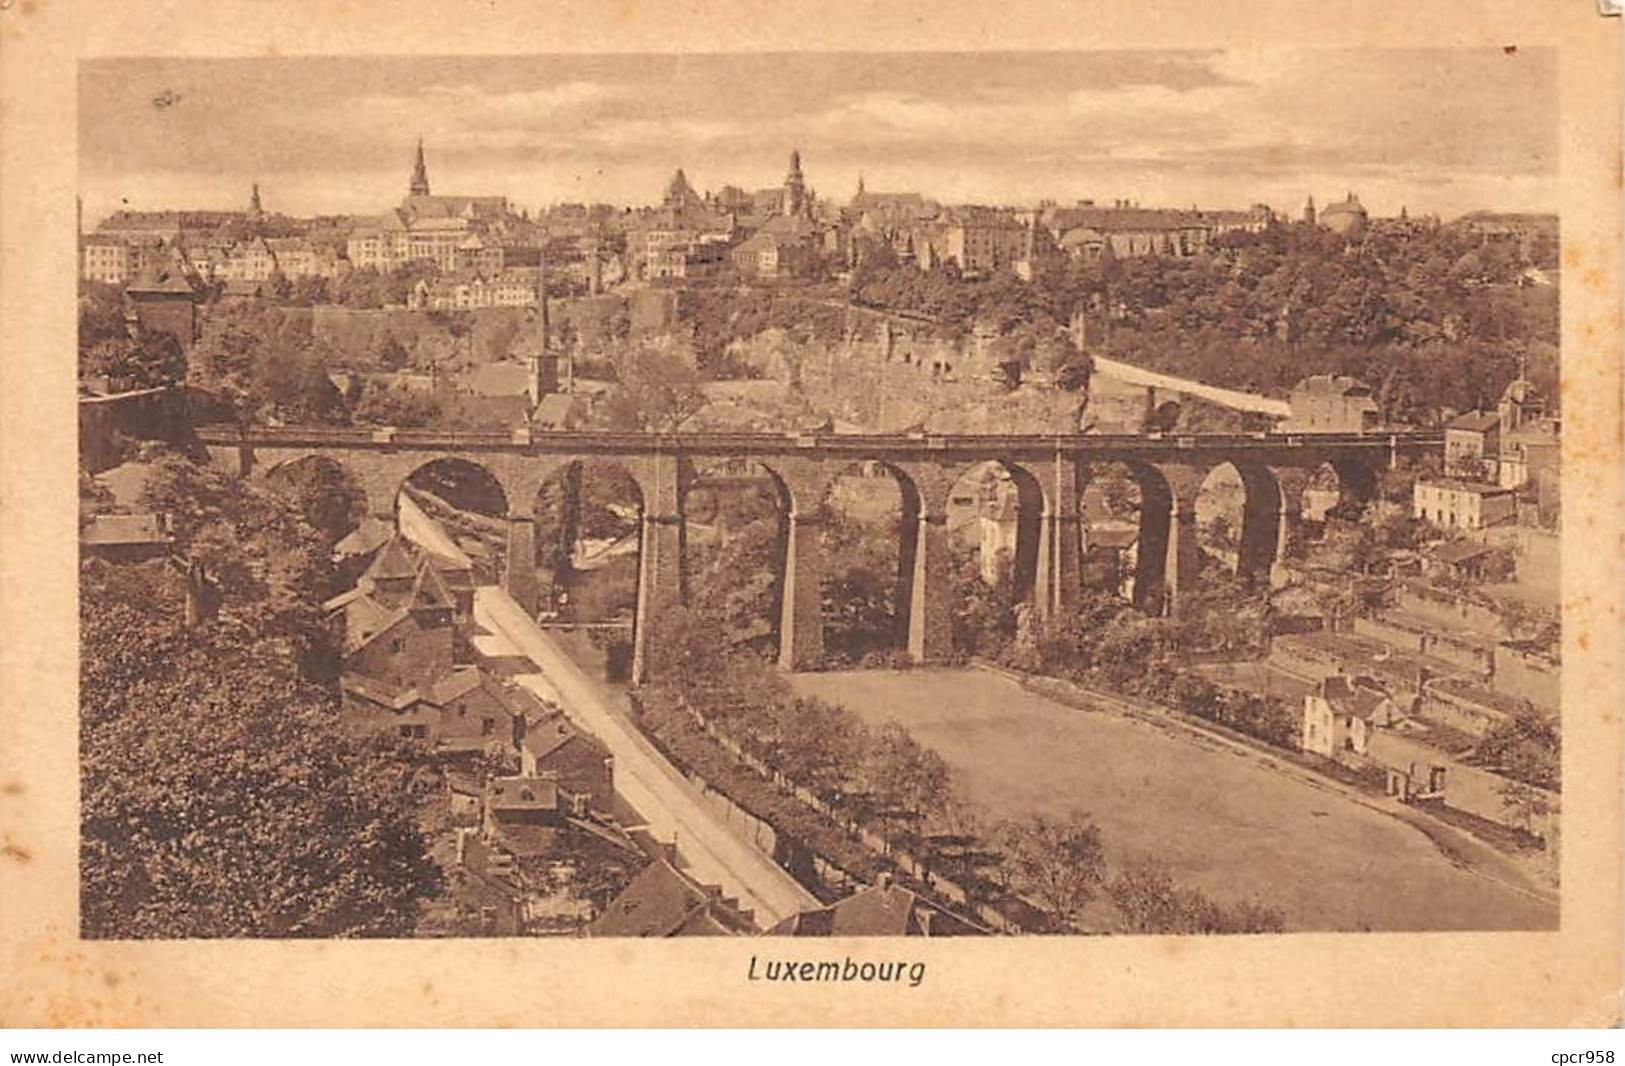 LUXEMBOURG - SAN49850 - Luxembourg - Luxemburg - Stadt